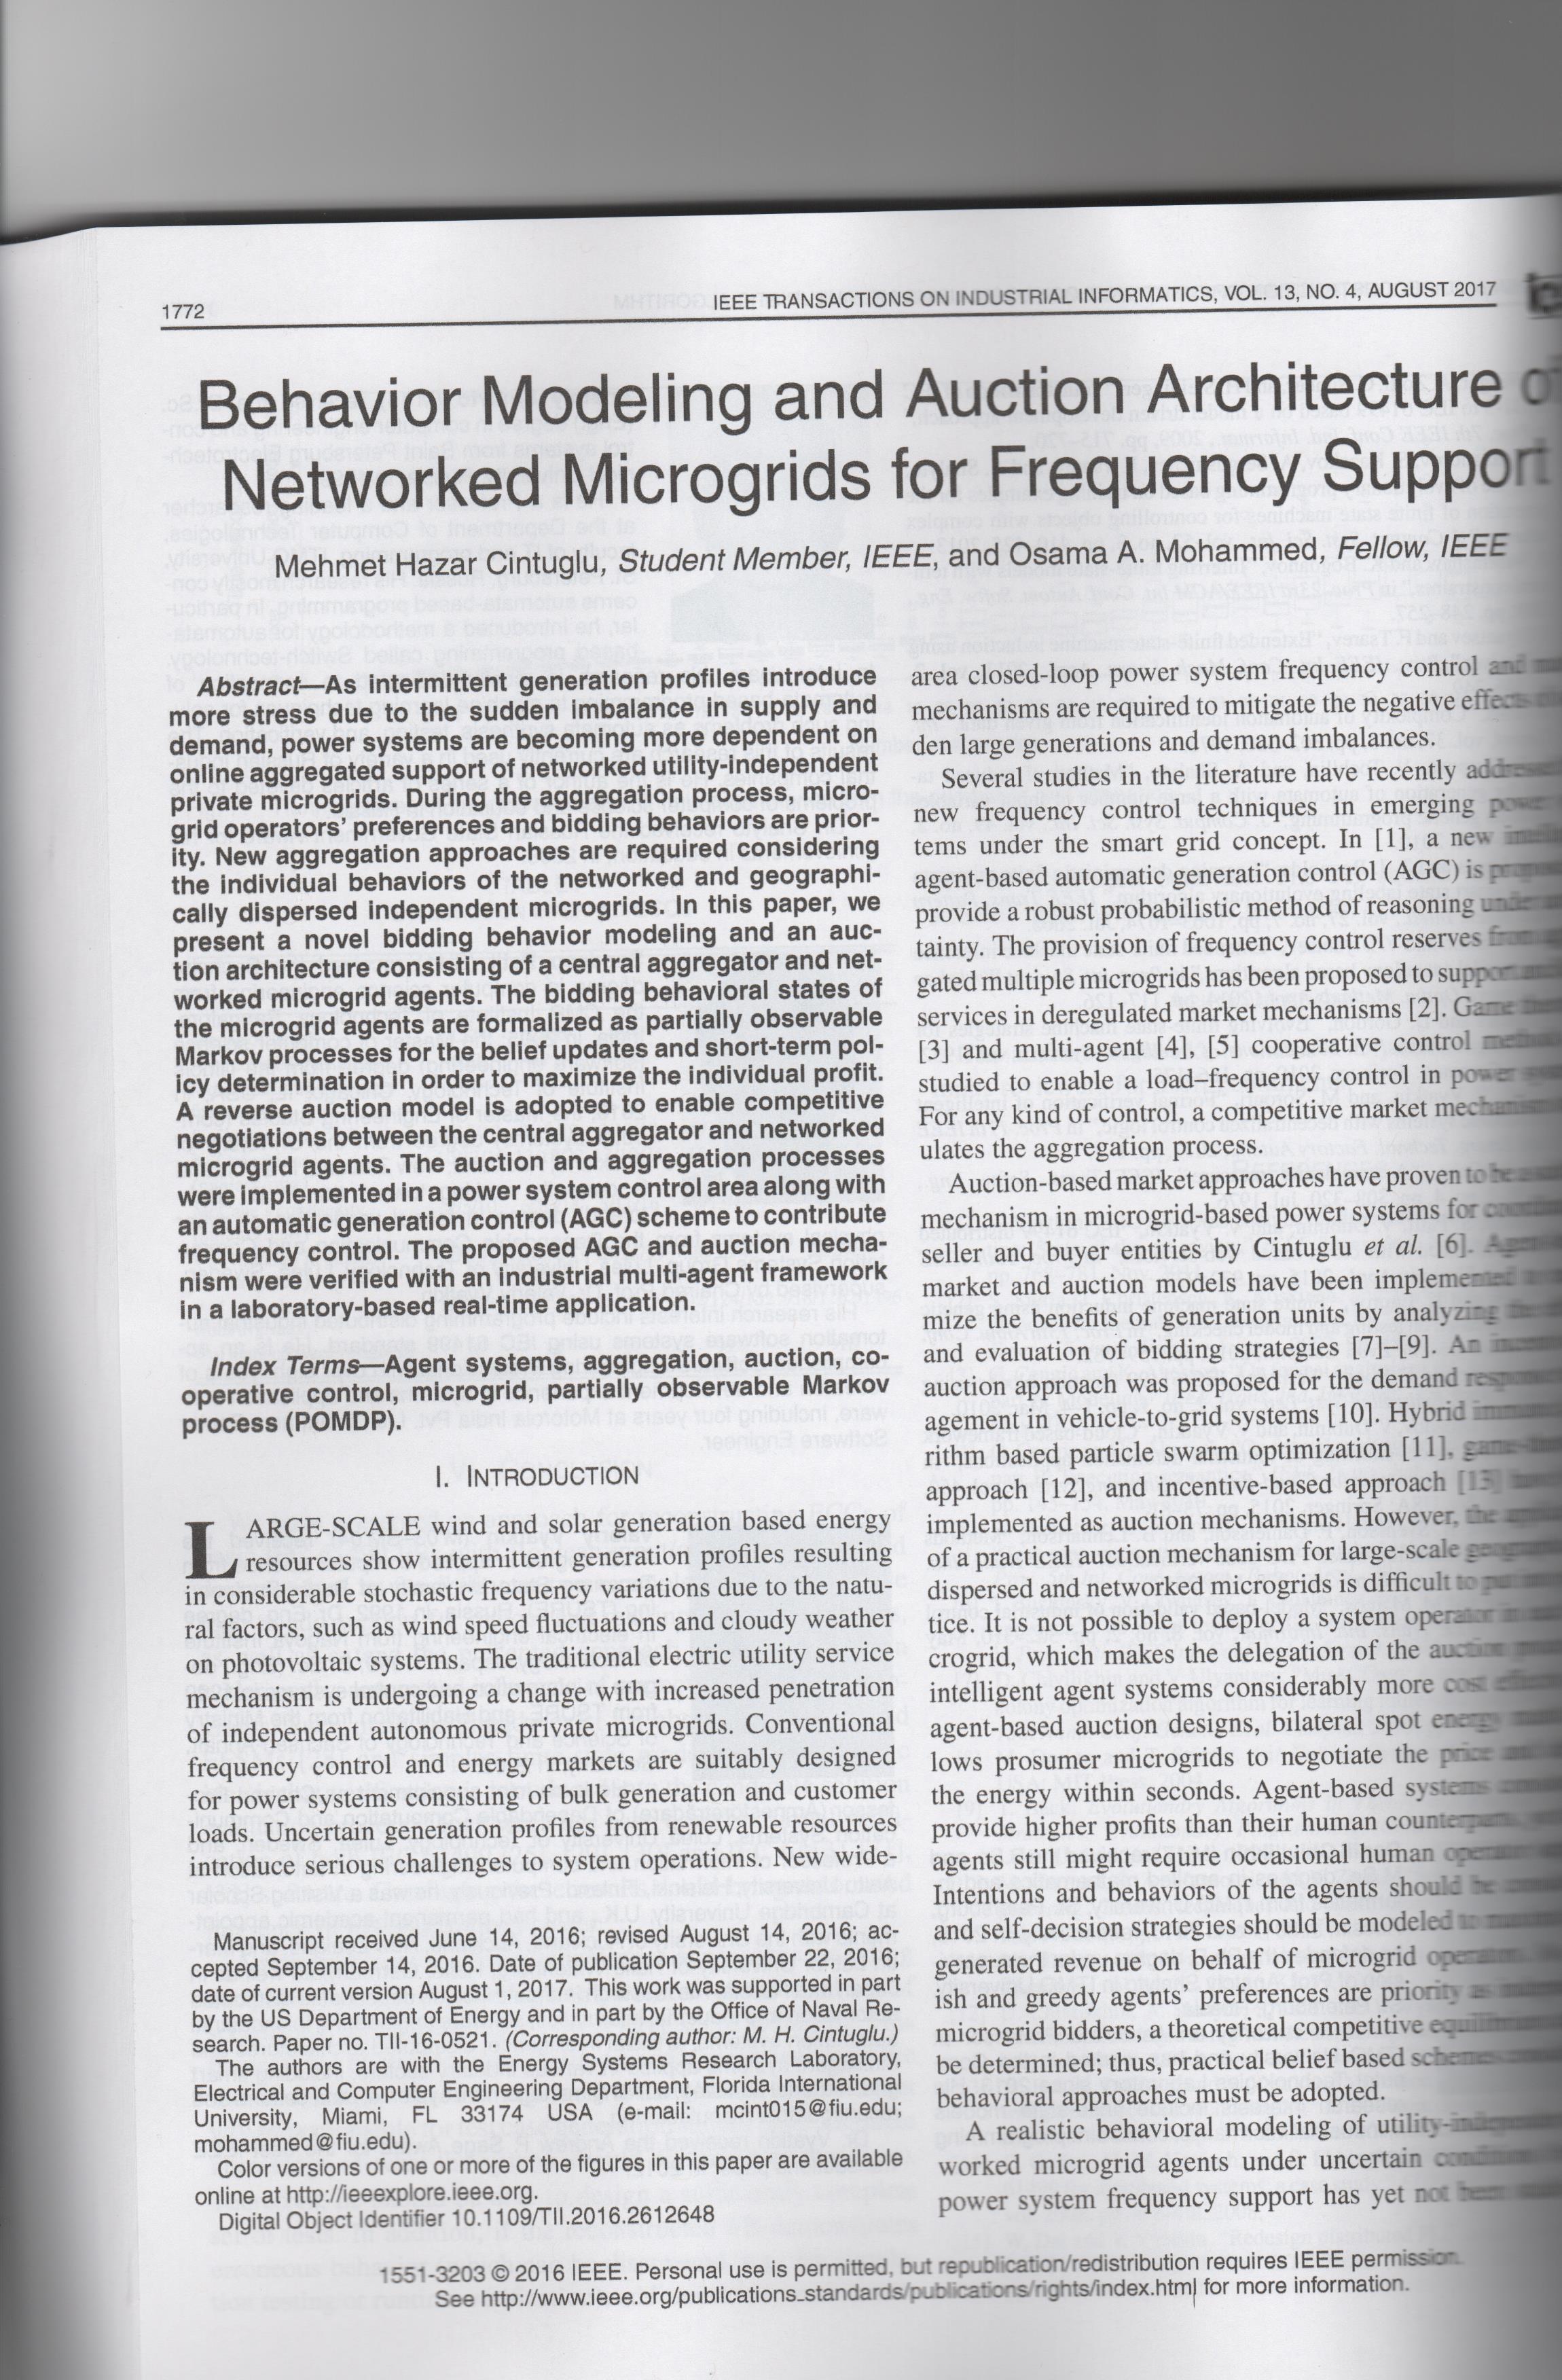 Behavior Modeling and Auction Architecture of Networked Microgrids for Frequency Support,